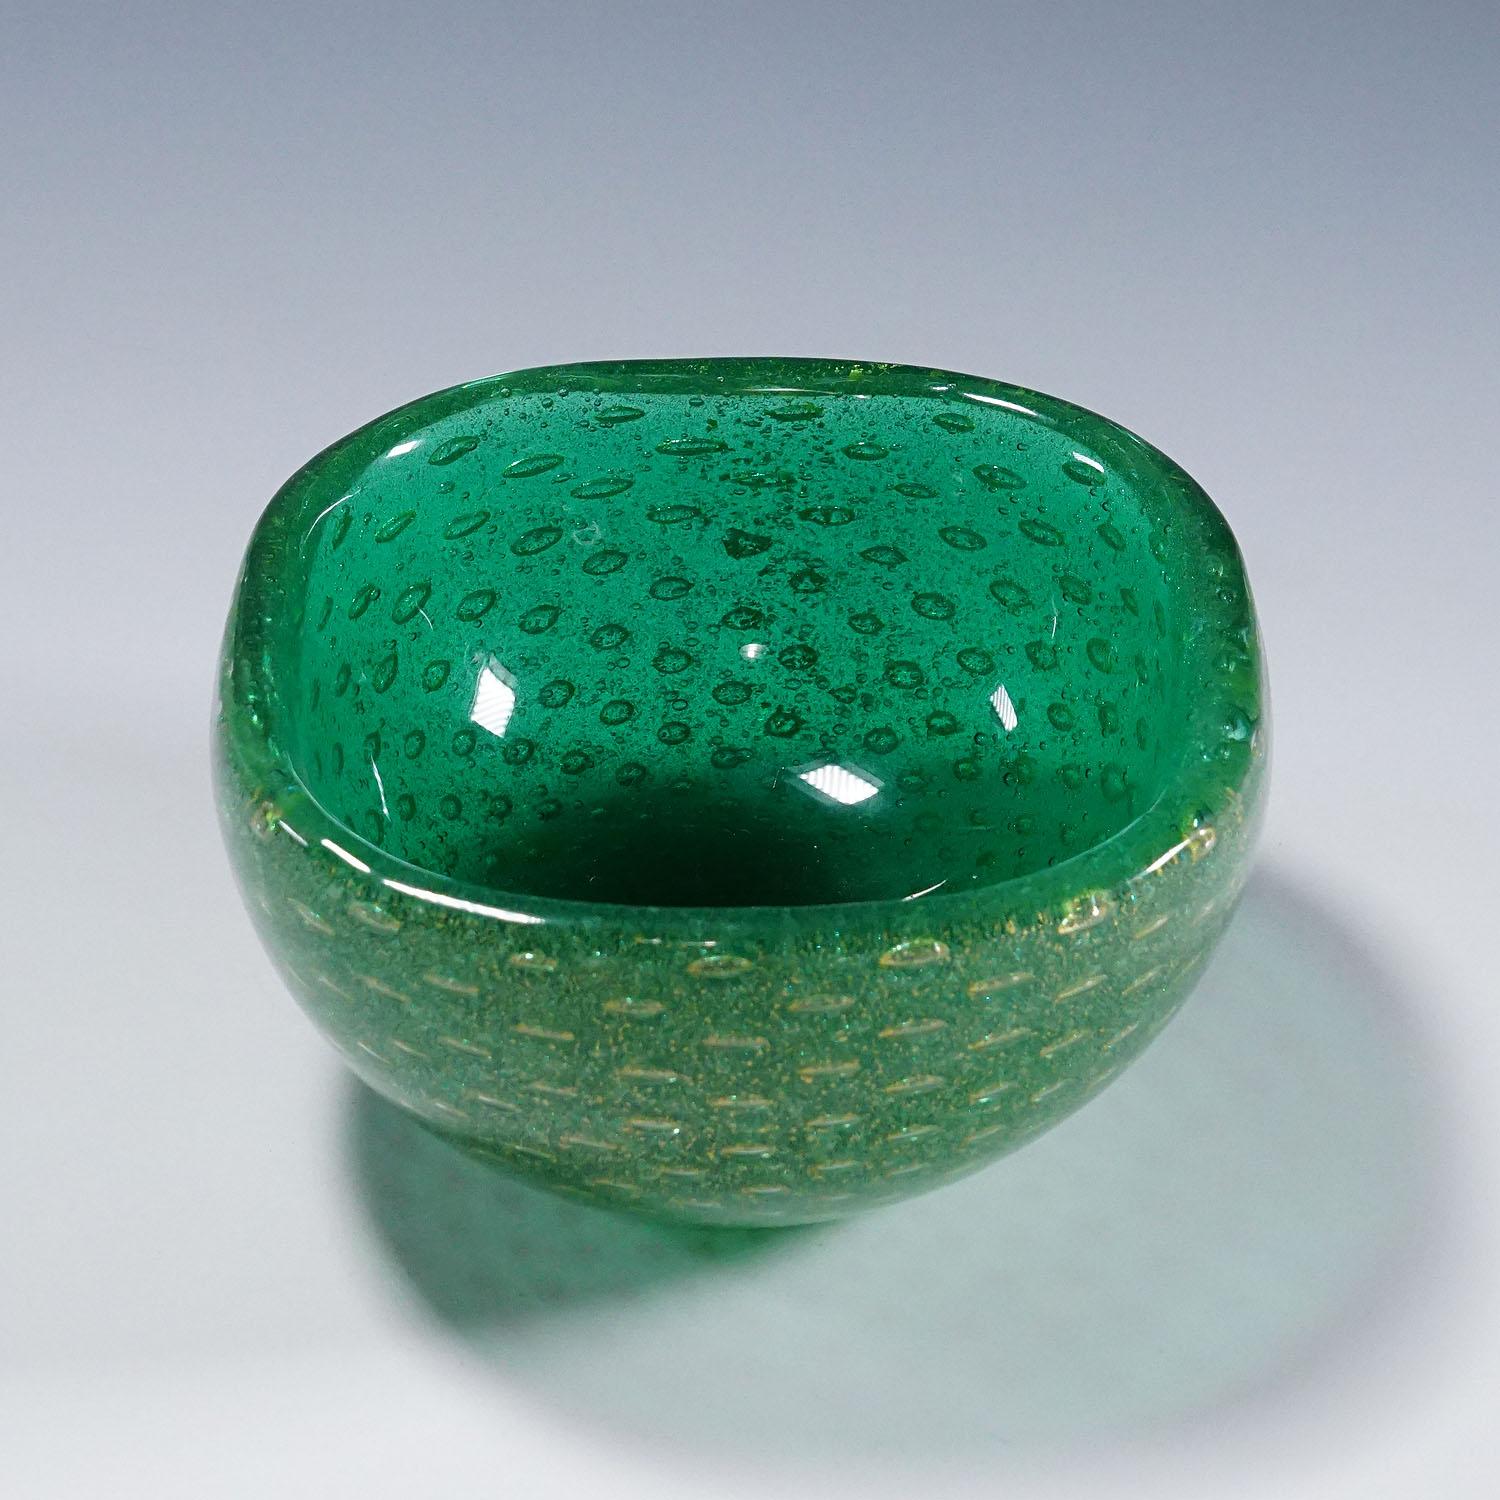 Hand-Crafted Small Bowl in Green Sommerso Glass, Carlo Scarpa for Venini Murano 1930s For Sale